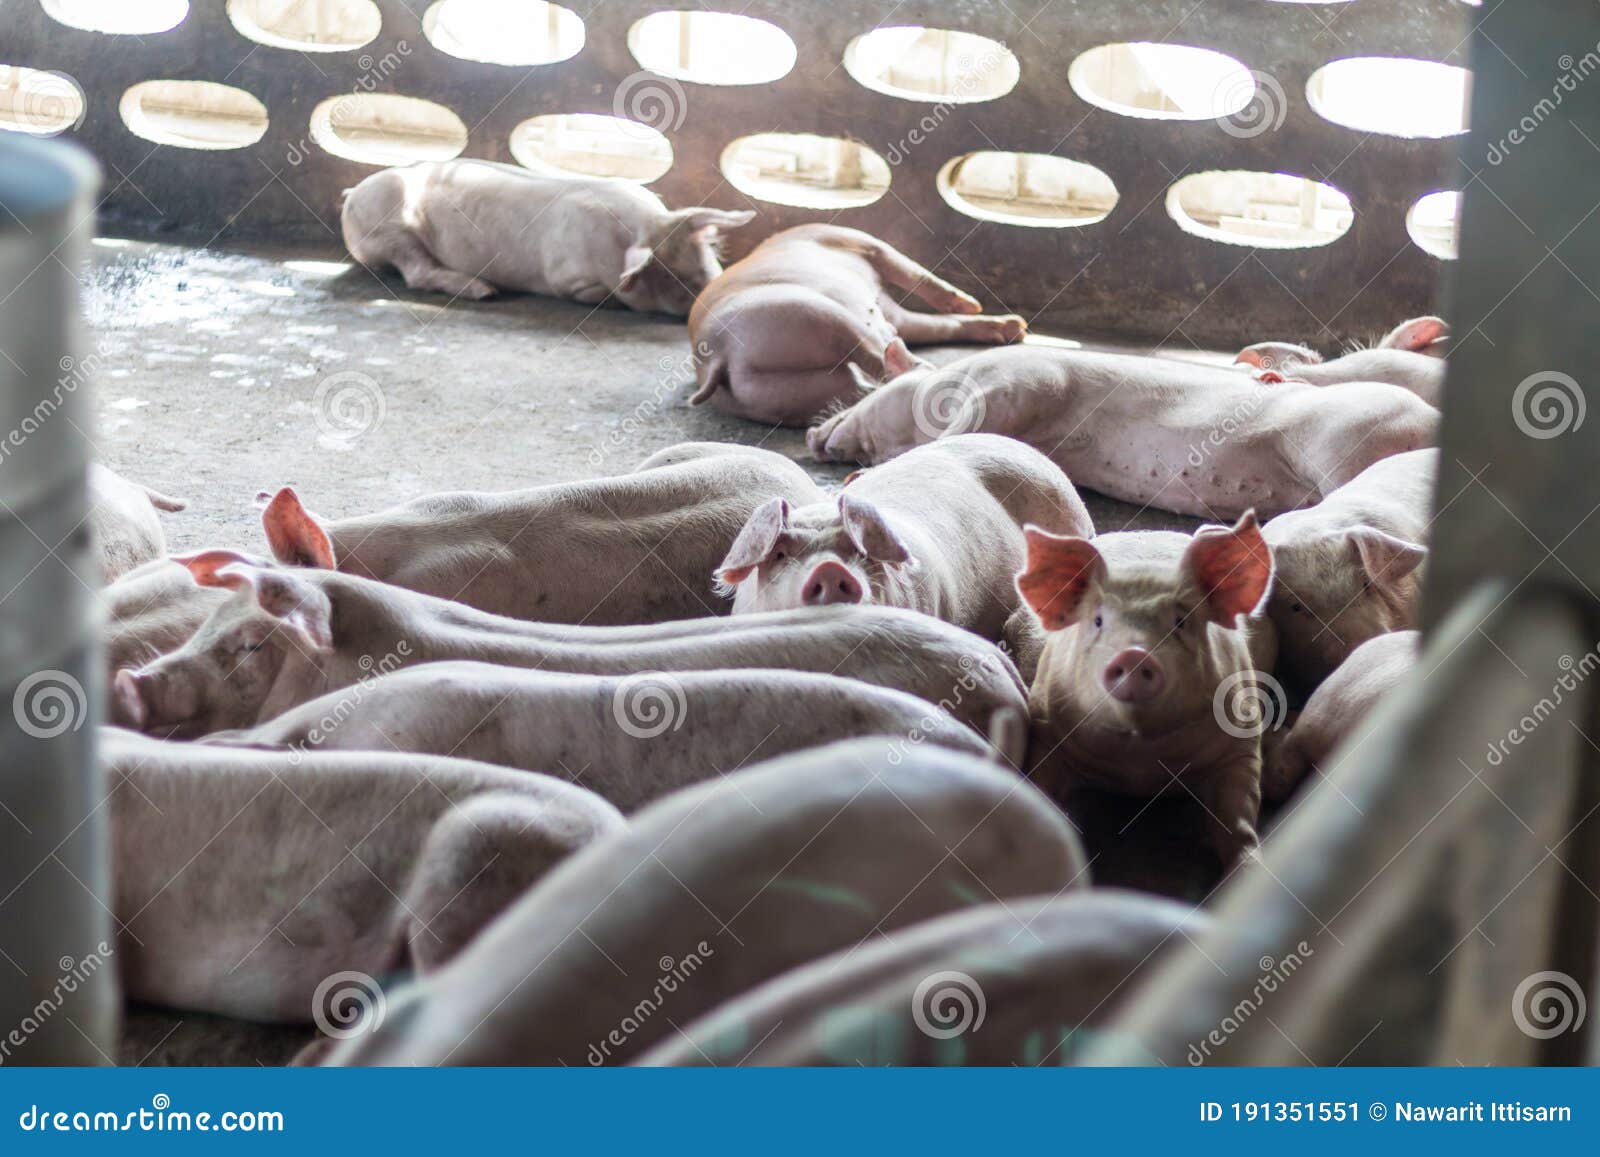 A Pig in a Ragged Farm after Eating Food. Stock Image - Image of swine,  gross: 191351551